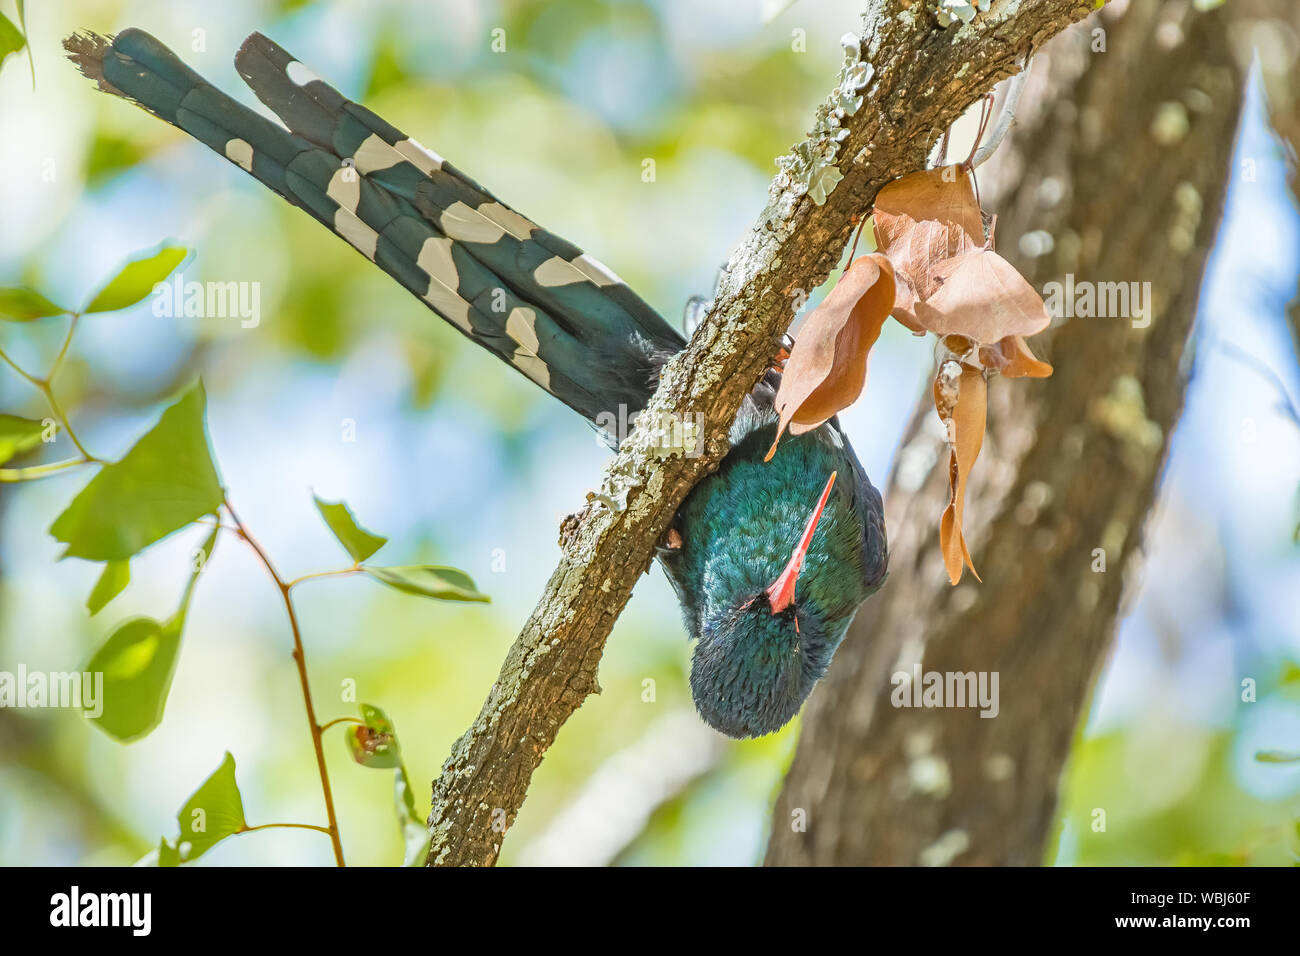 A Green wood-hoopoe, Phoeniculus purpereus, in an upside-down position Stock Photo